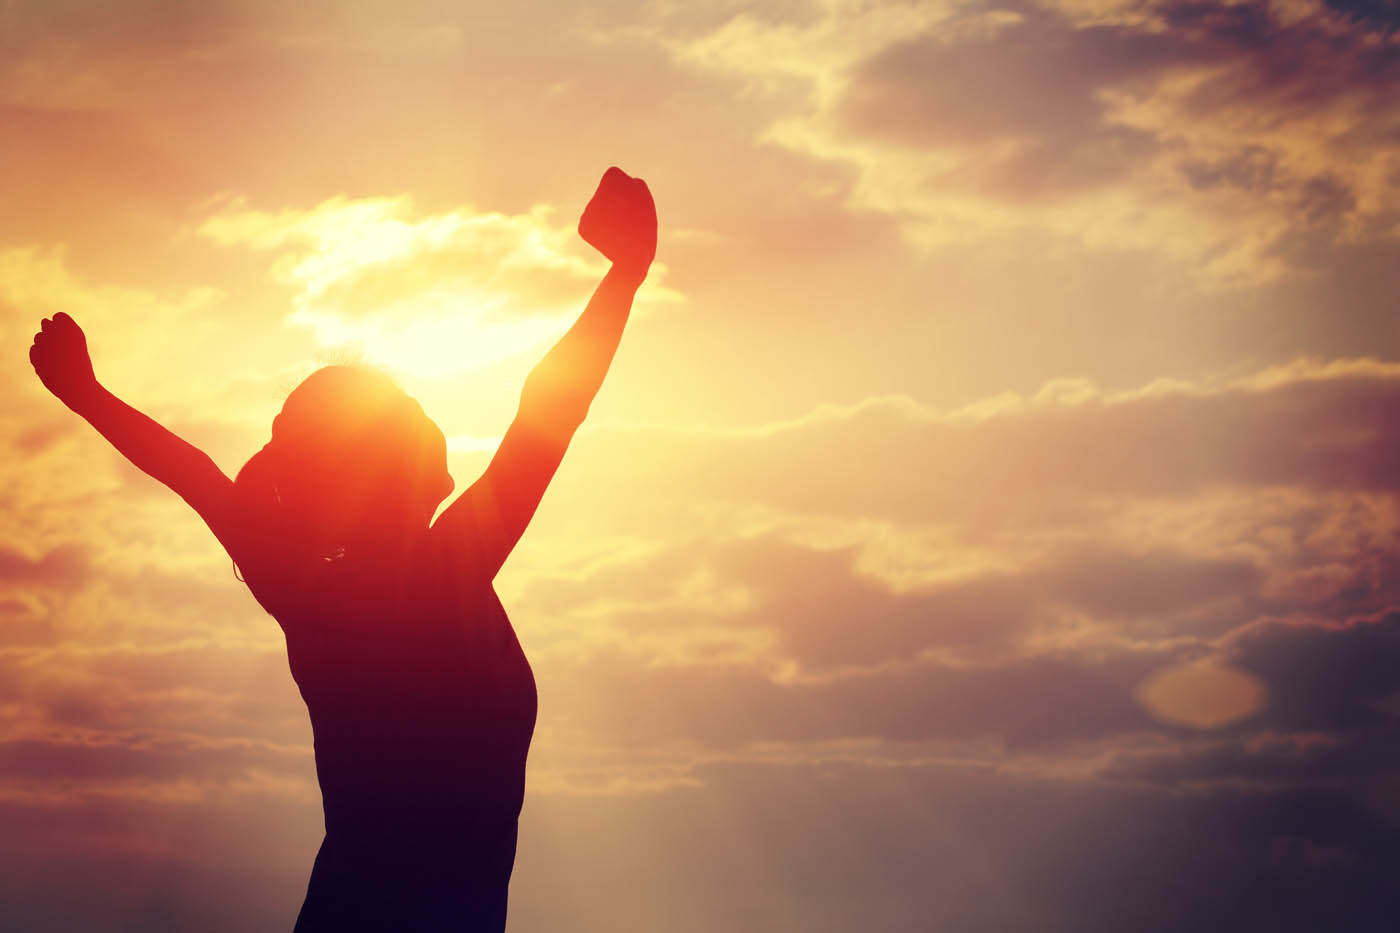 A woman standing in the light with her arms up in the air - learn how you can get relief with Light Lounge's back pain management in St. Charles, MO.